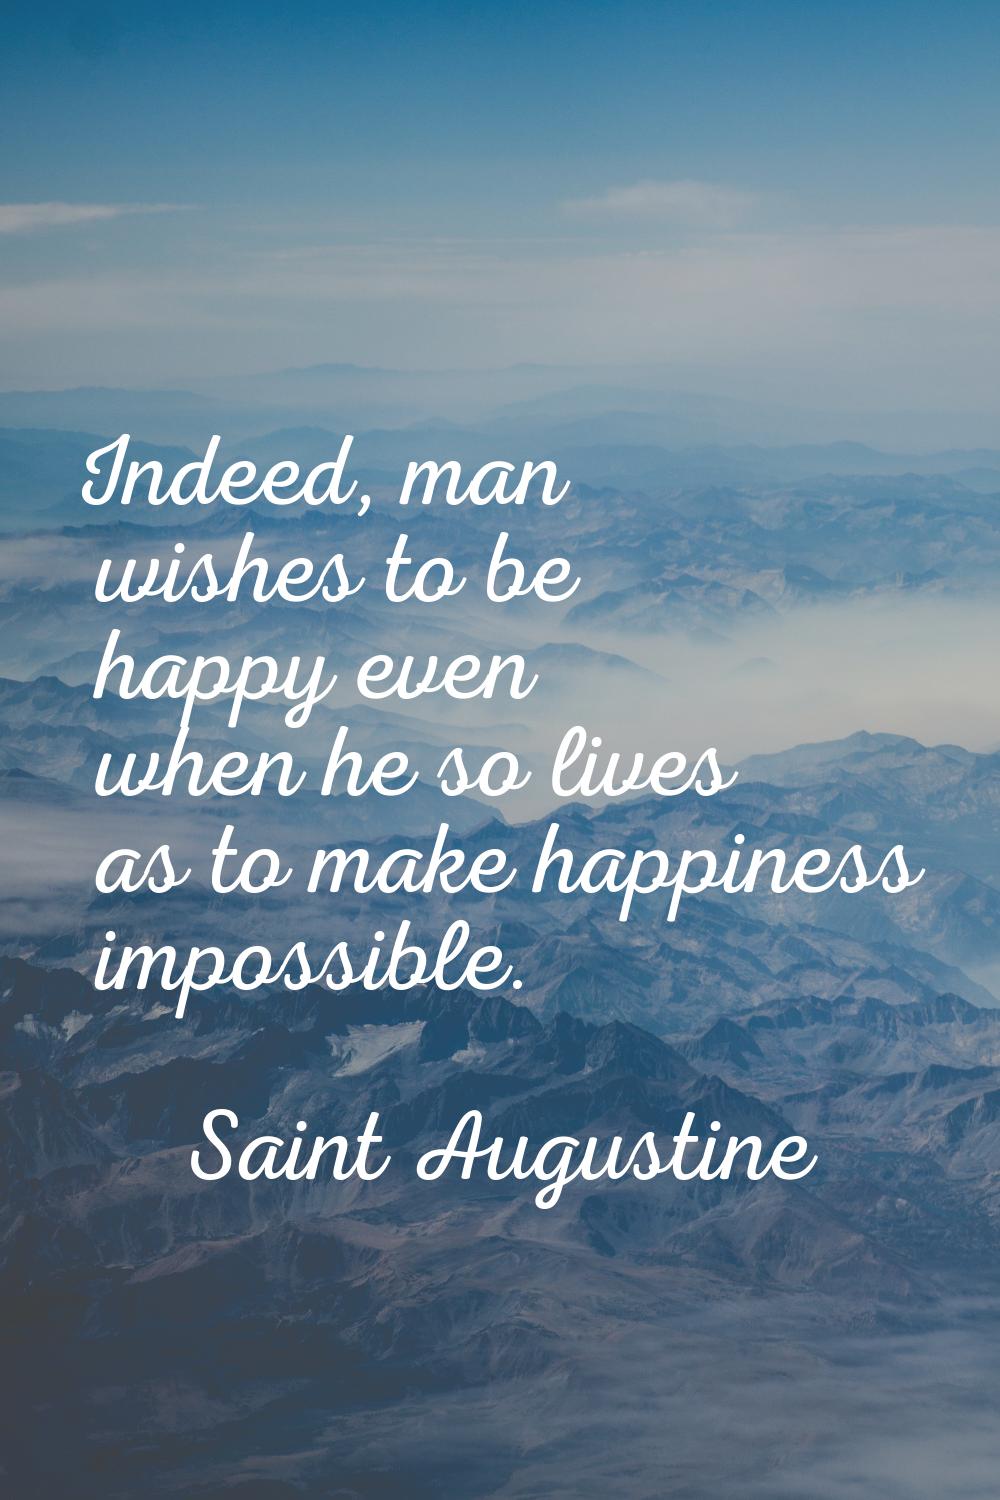 Indeed, man wishes to be happy even when he so lives as to make happiness impossible.